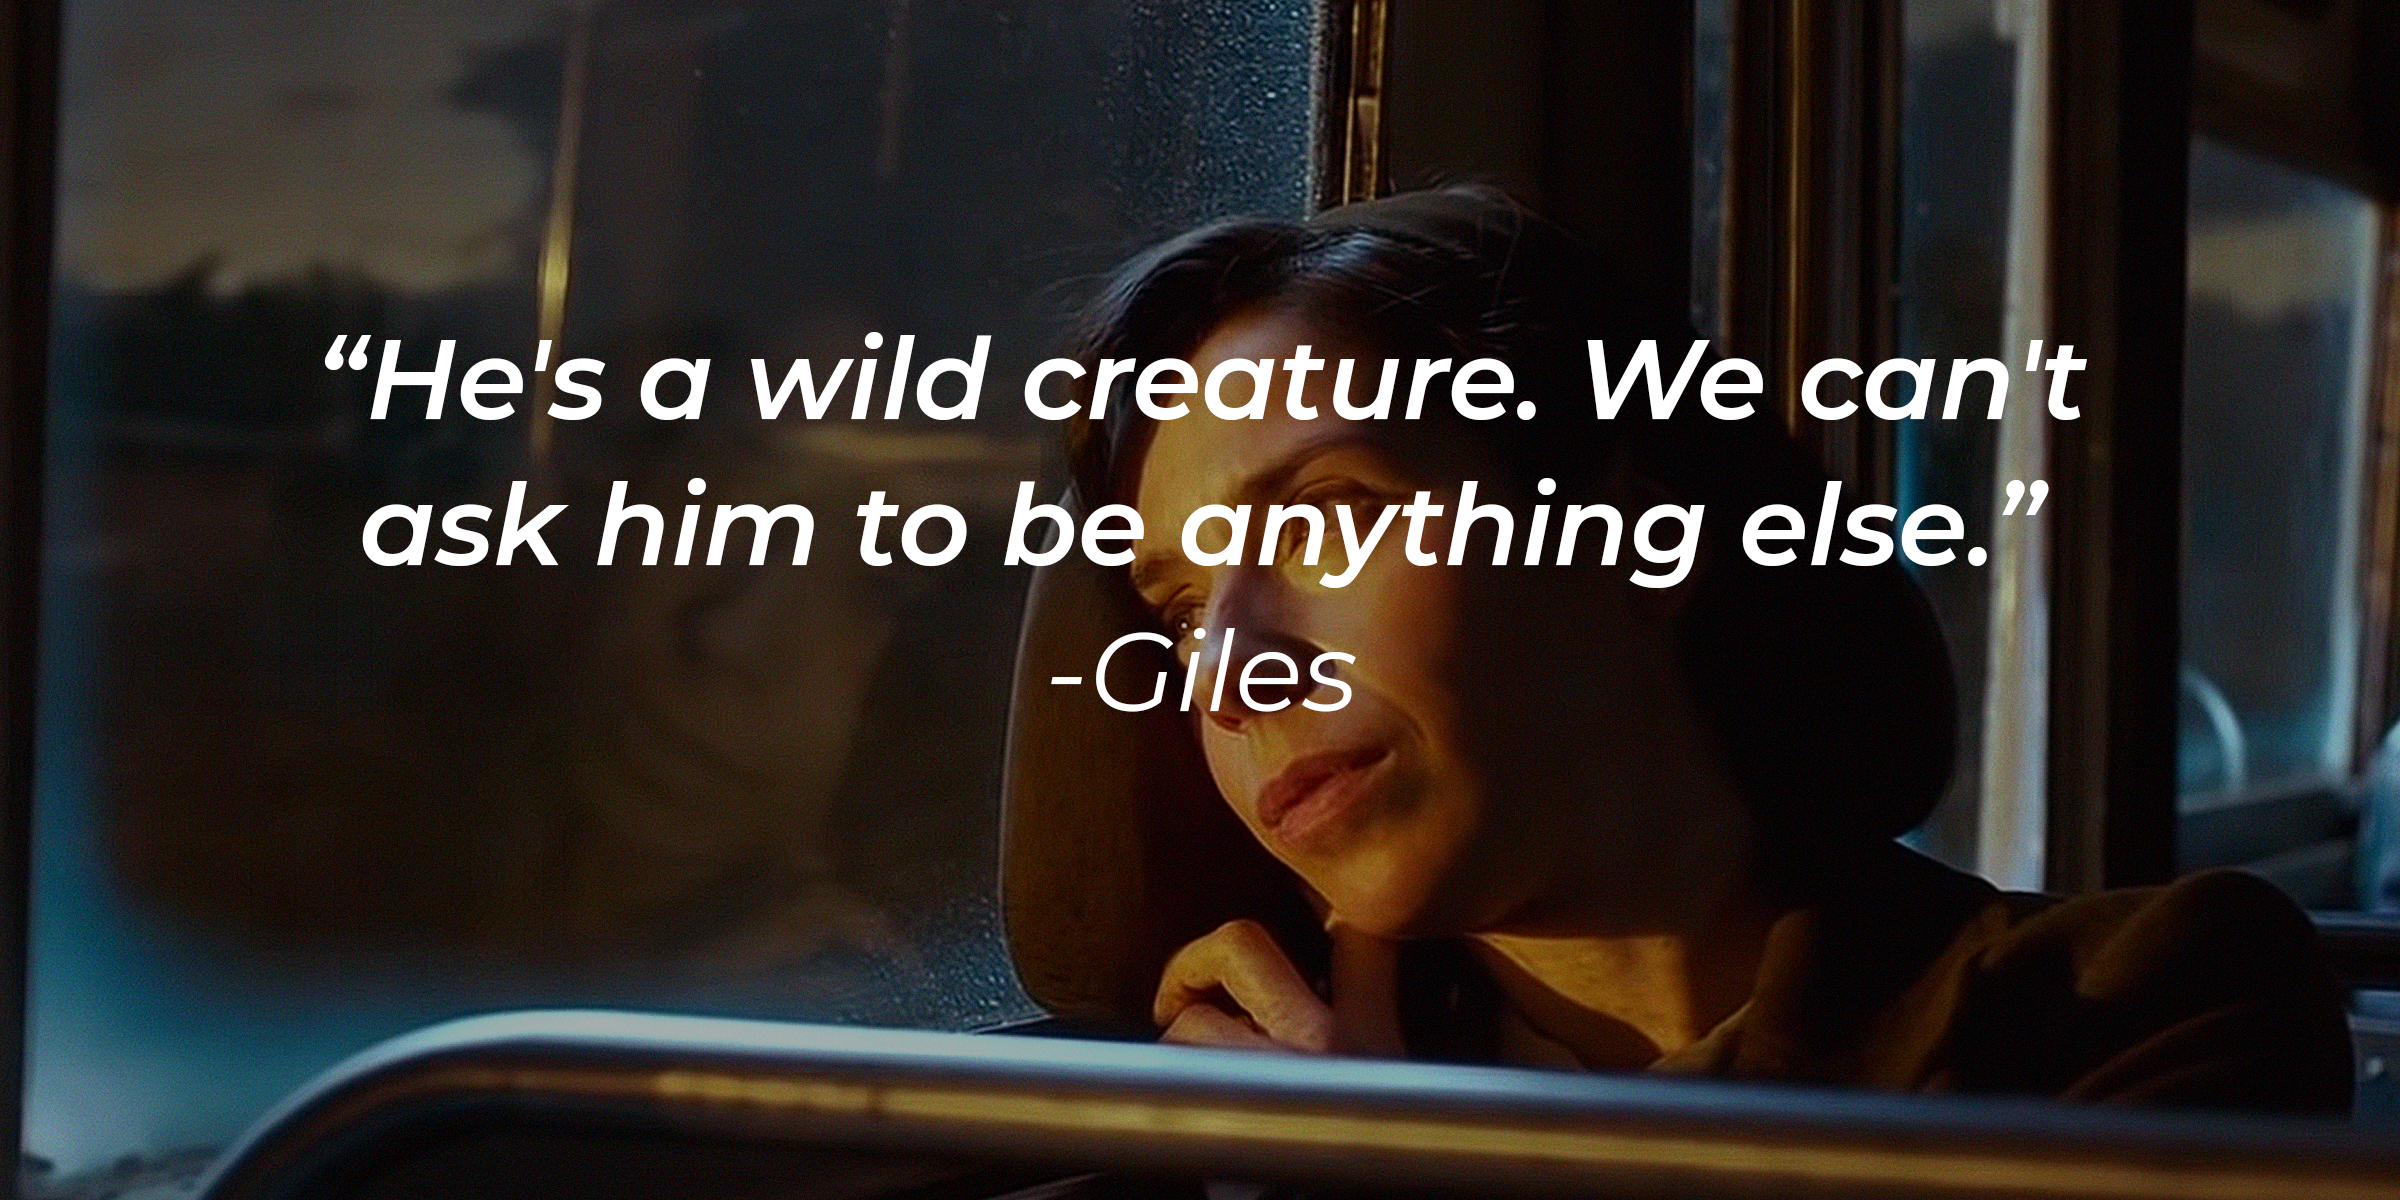 A photo of Elisa and Giles's quote "He's a wild creature. We can't ask him to be anything else." | Source: youtube.com/searchlightpictures